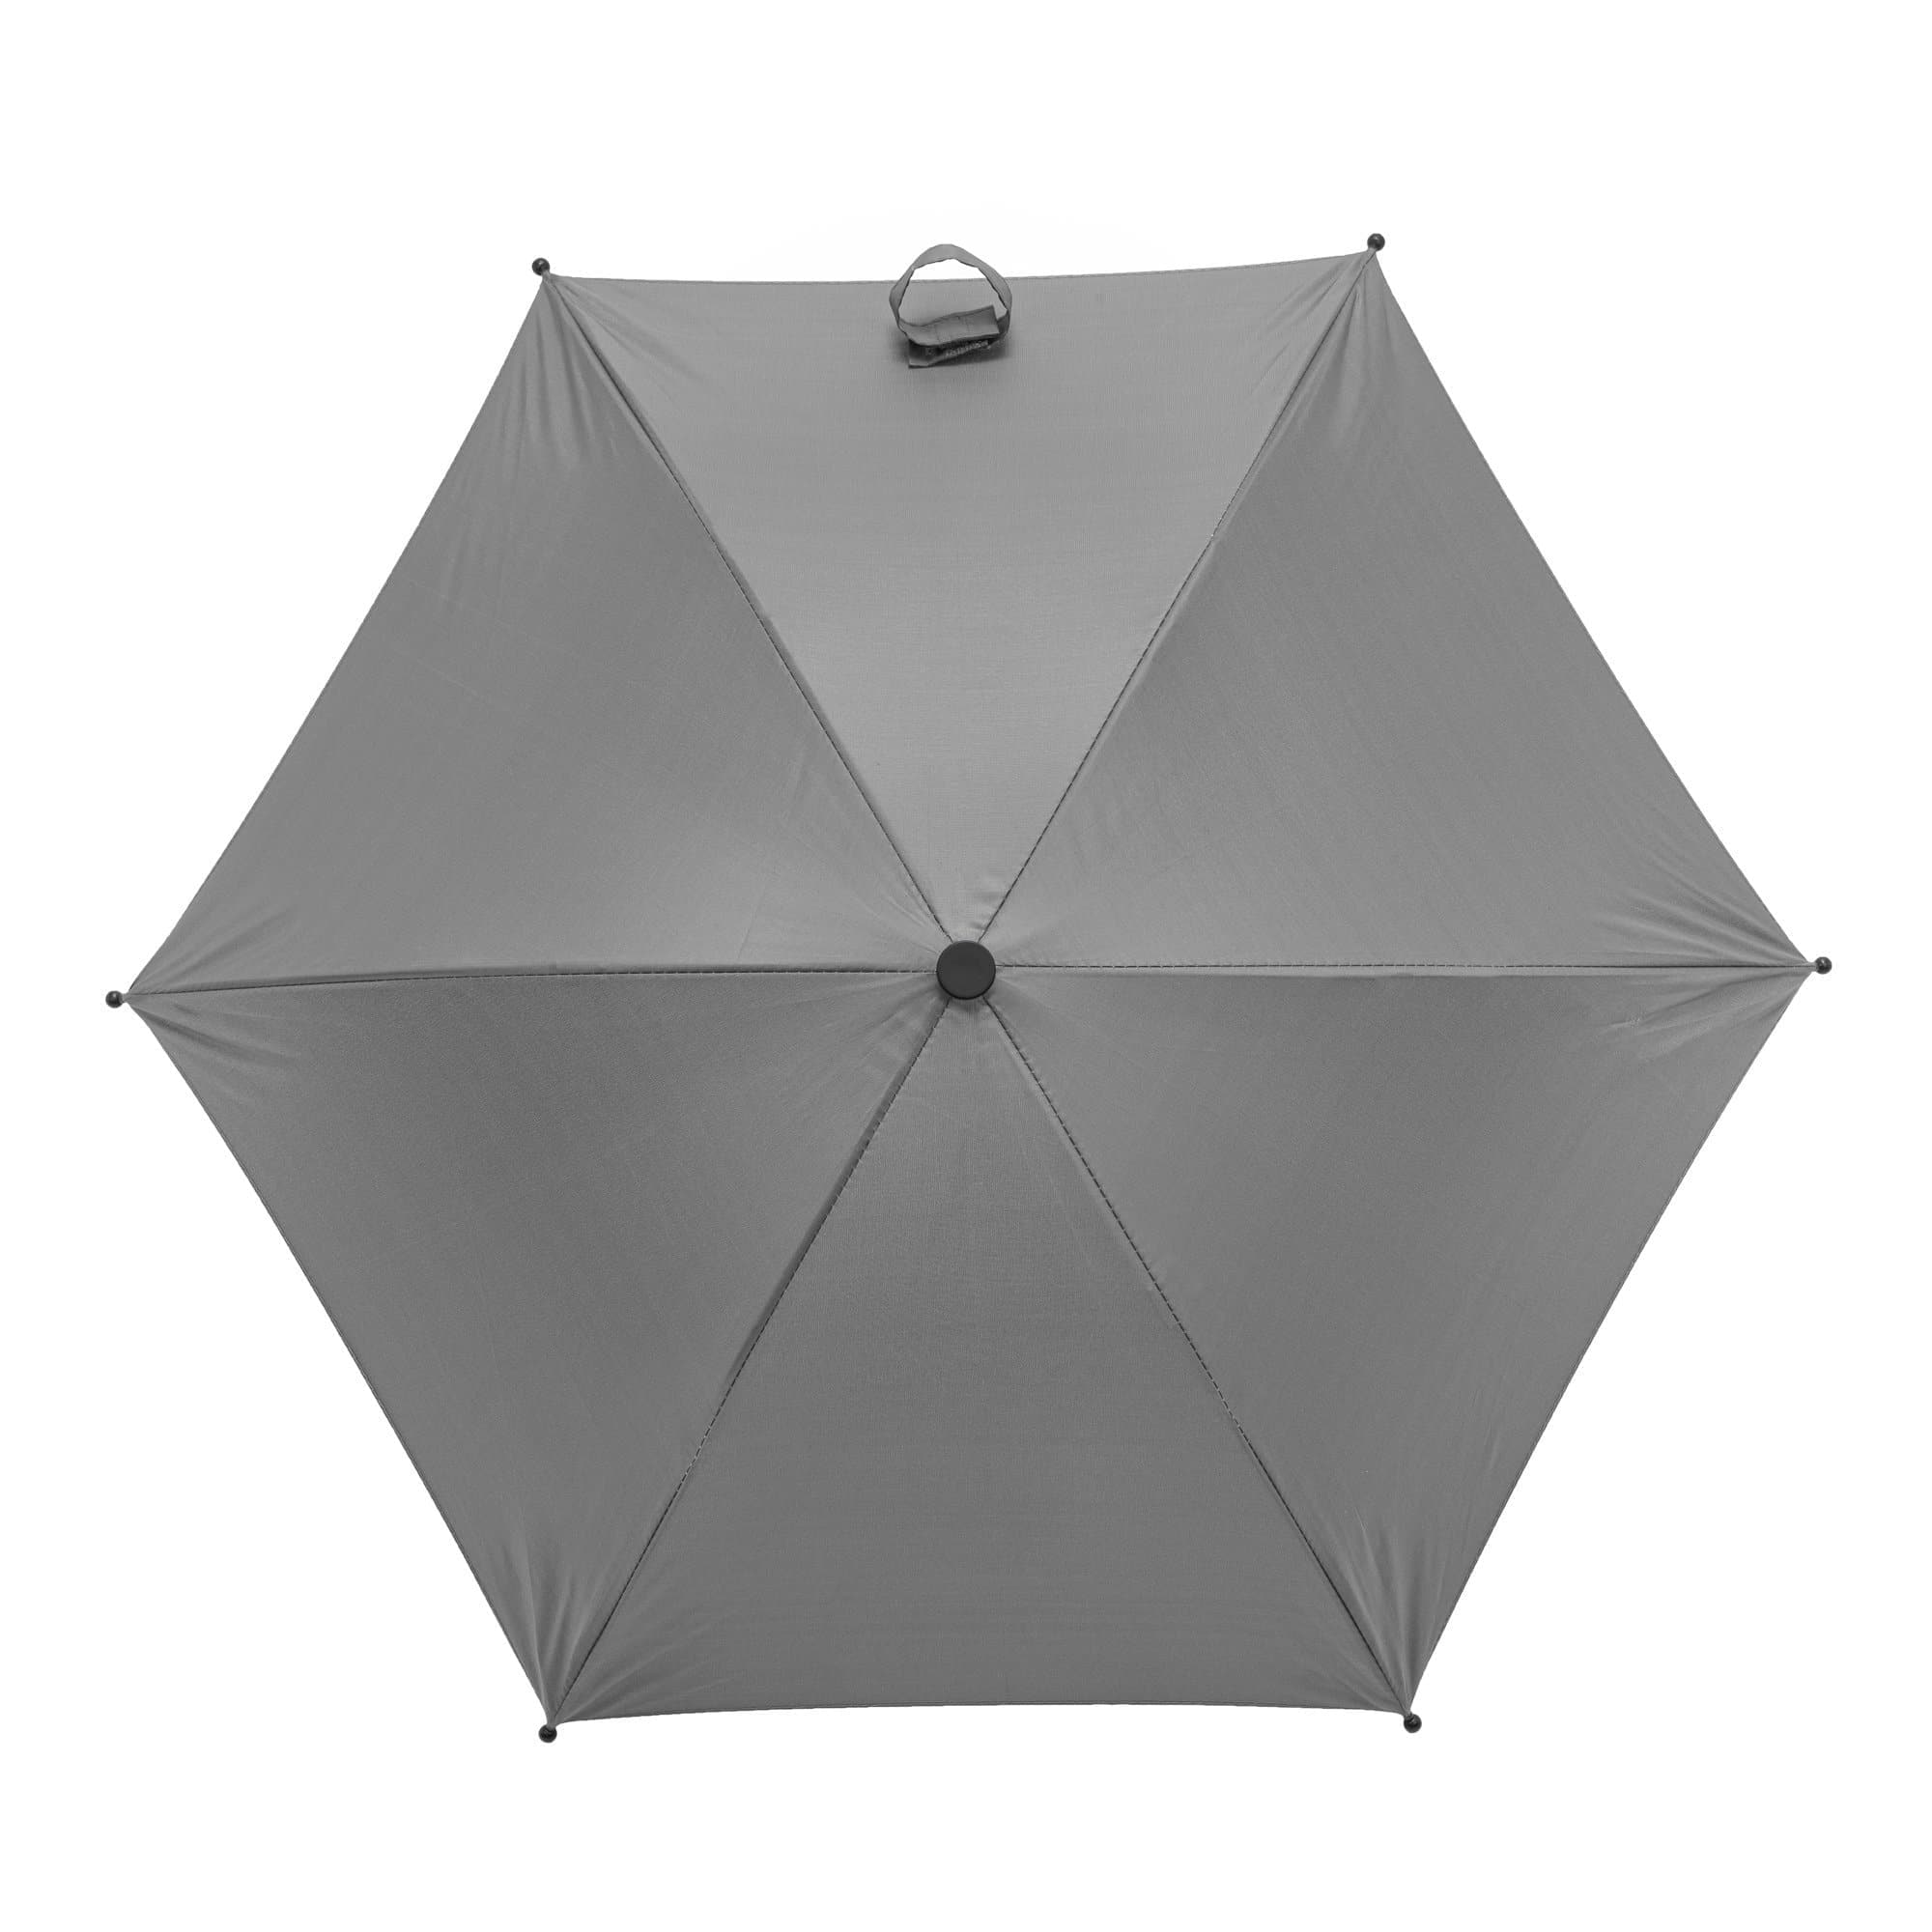 Baby Parasol Compatible With Excel - Fits All Models - For Your Little One